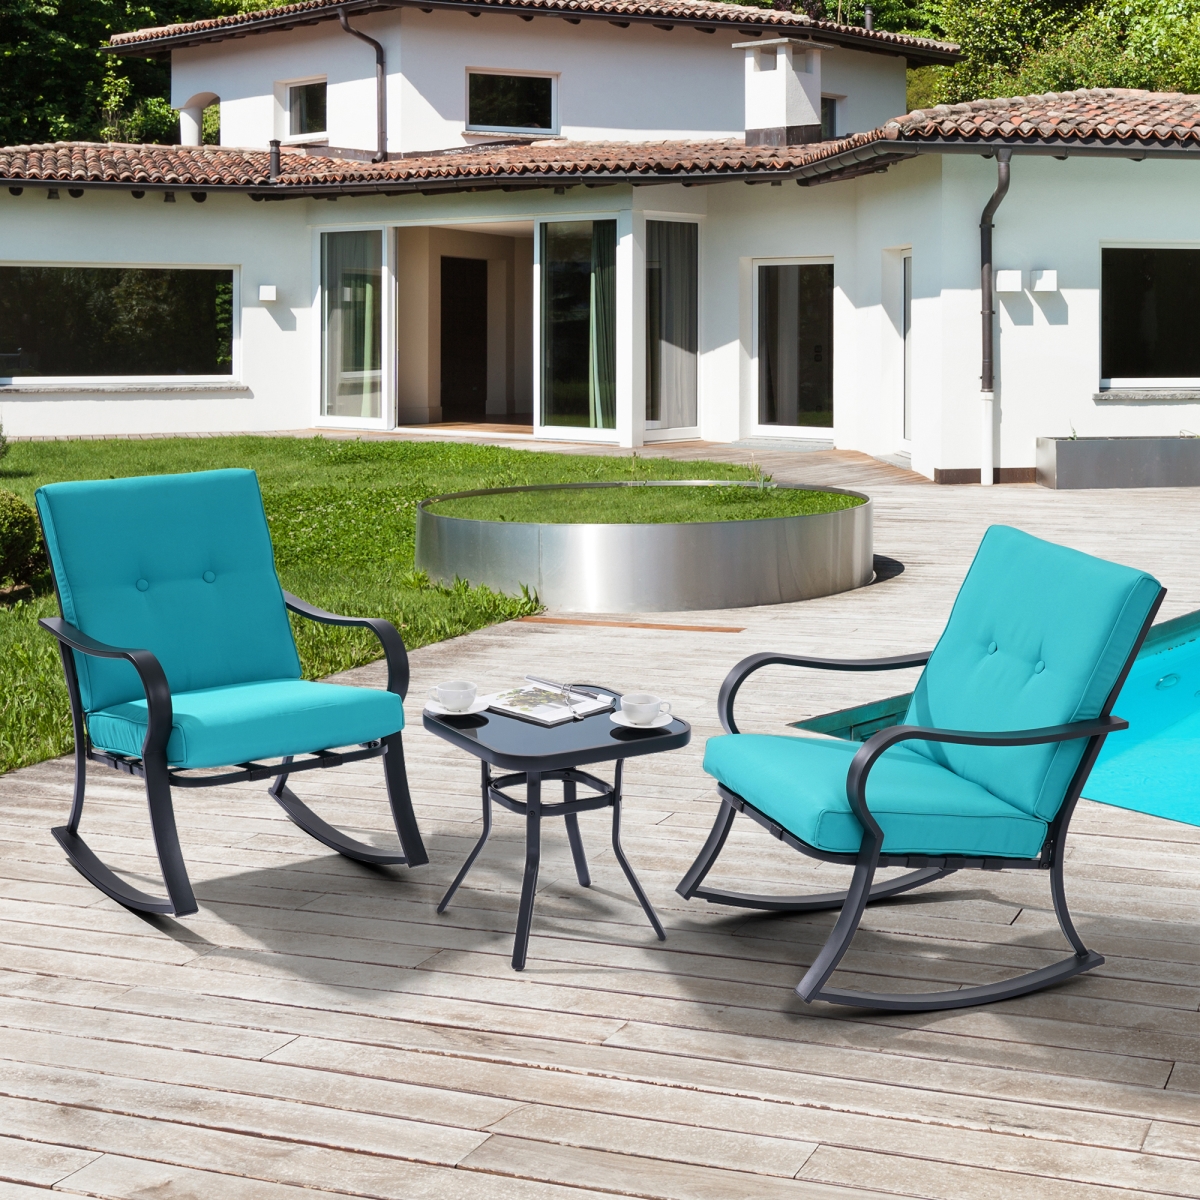 SANLUCE UN-KF-A17L 3-Piece Metal Frame Outdoor Bistro Set 2 Rocking Chairs with Lake Blue Cushions and Tempered Glass Side Table